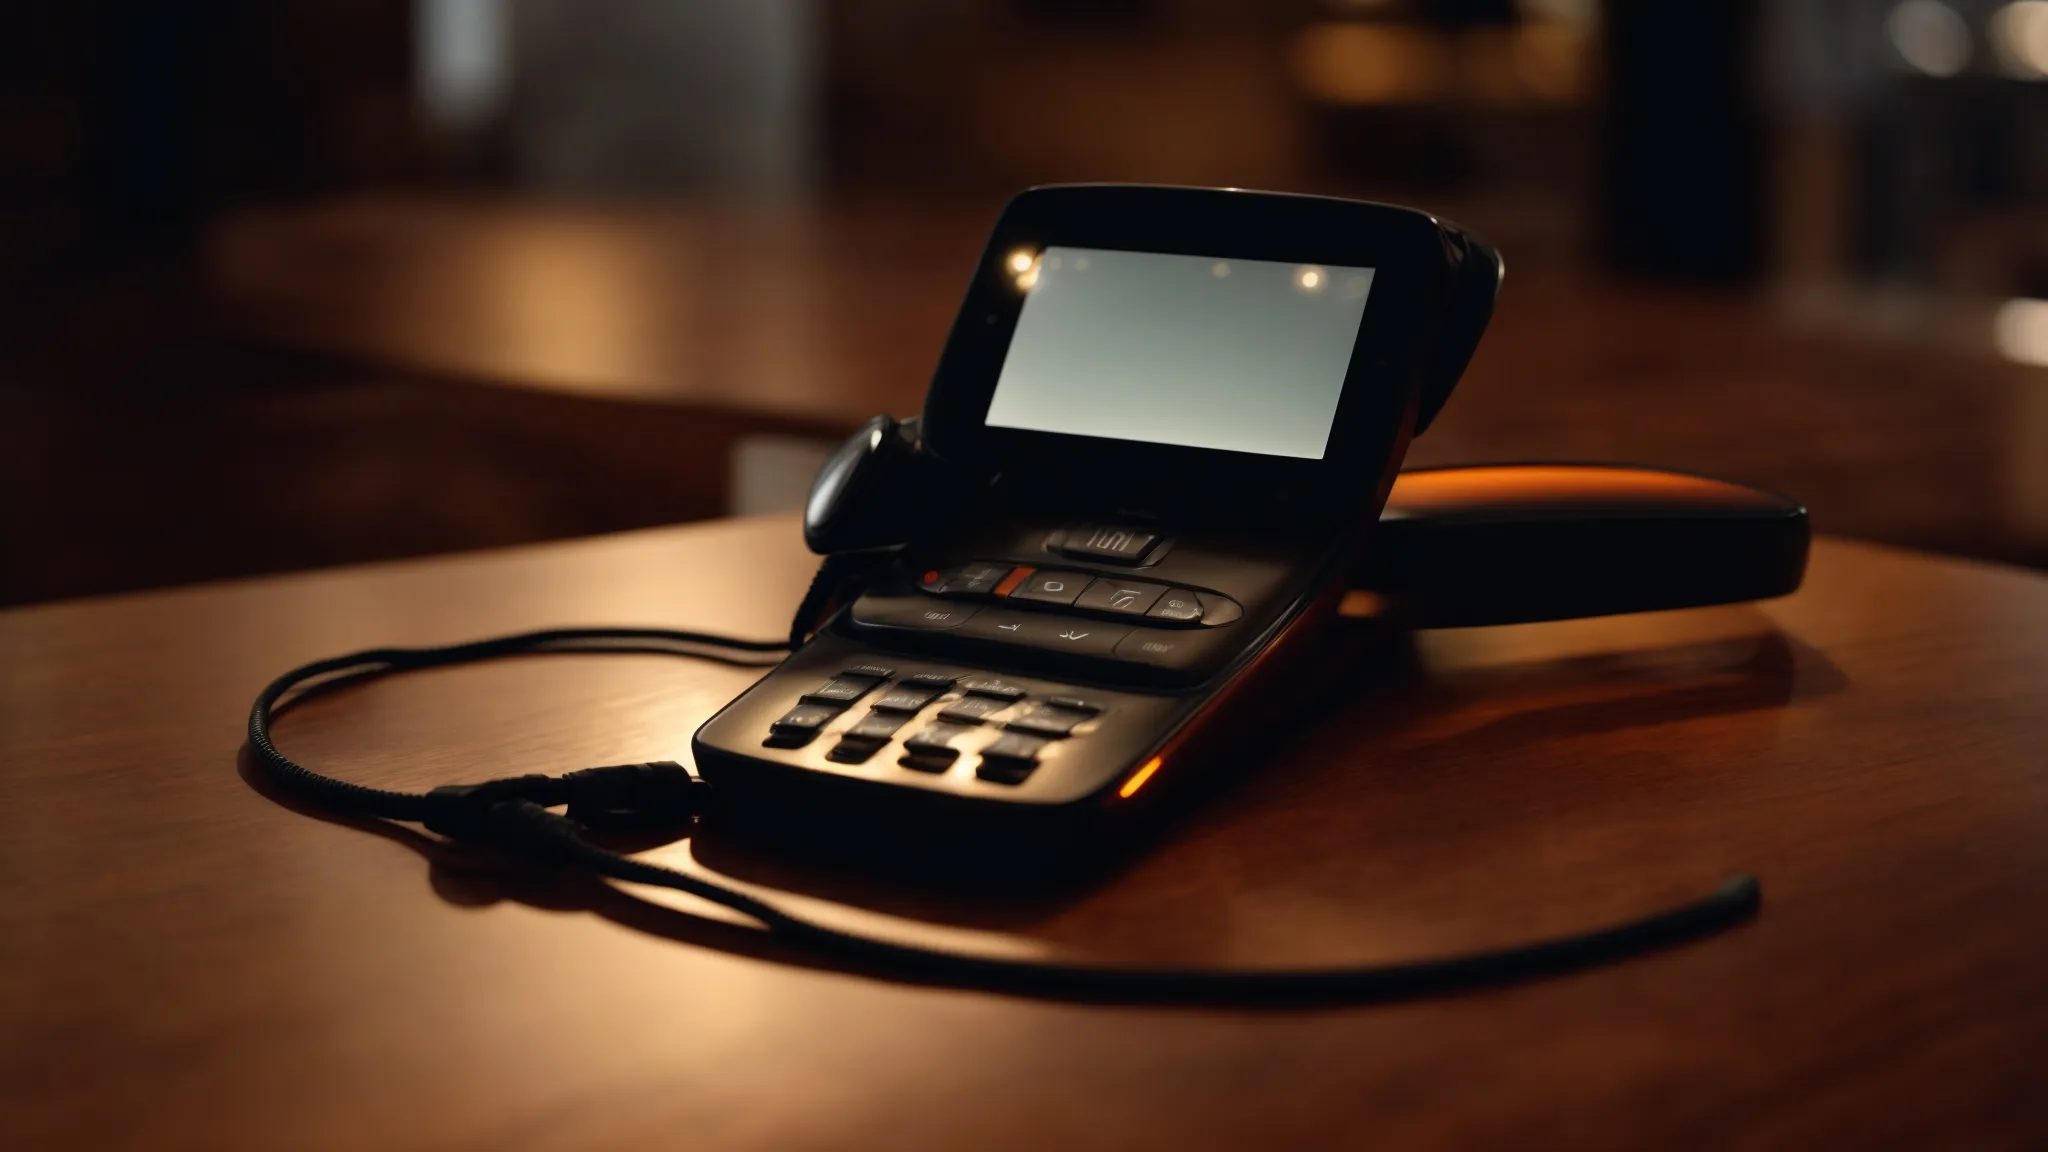 a motorola phone lying on a wooden table, illuminated by the flashing screen showing an incoming call.